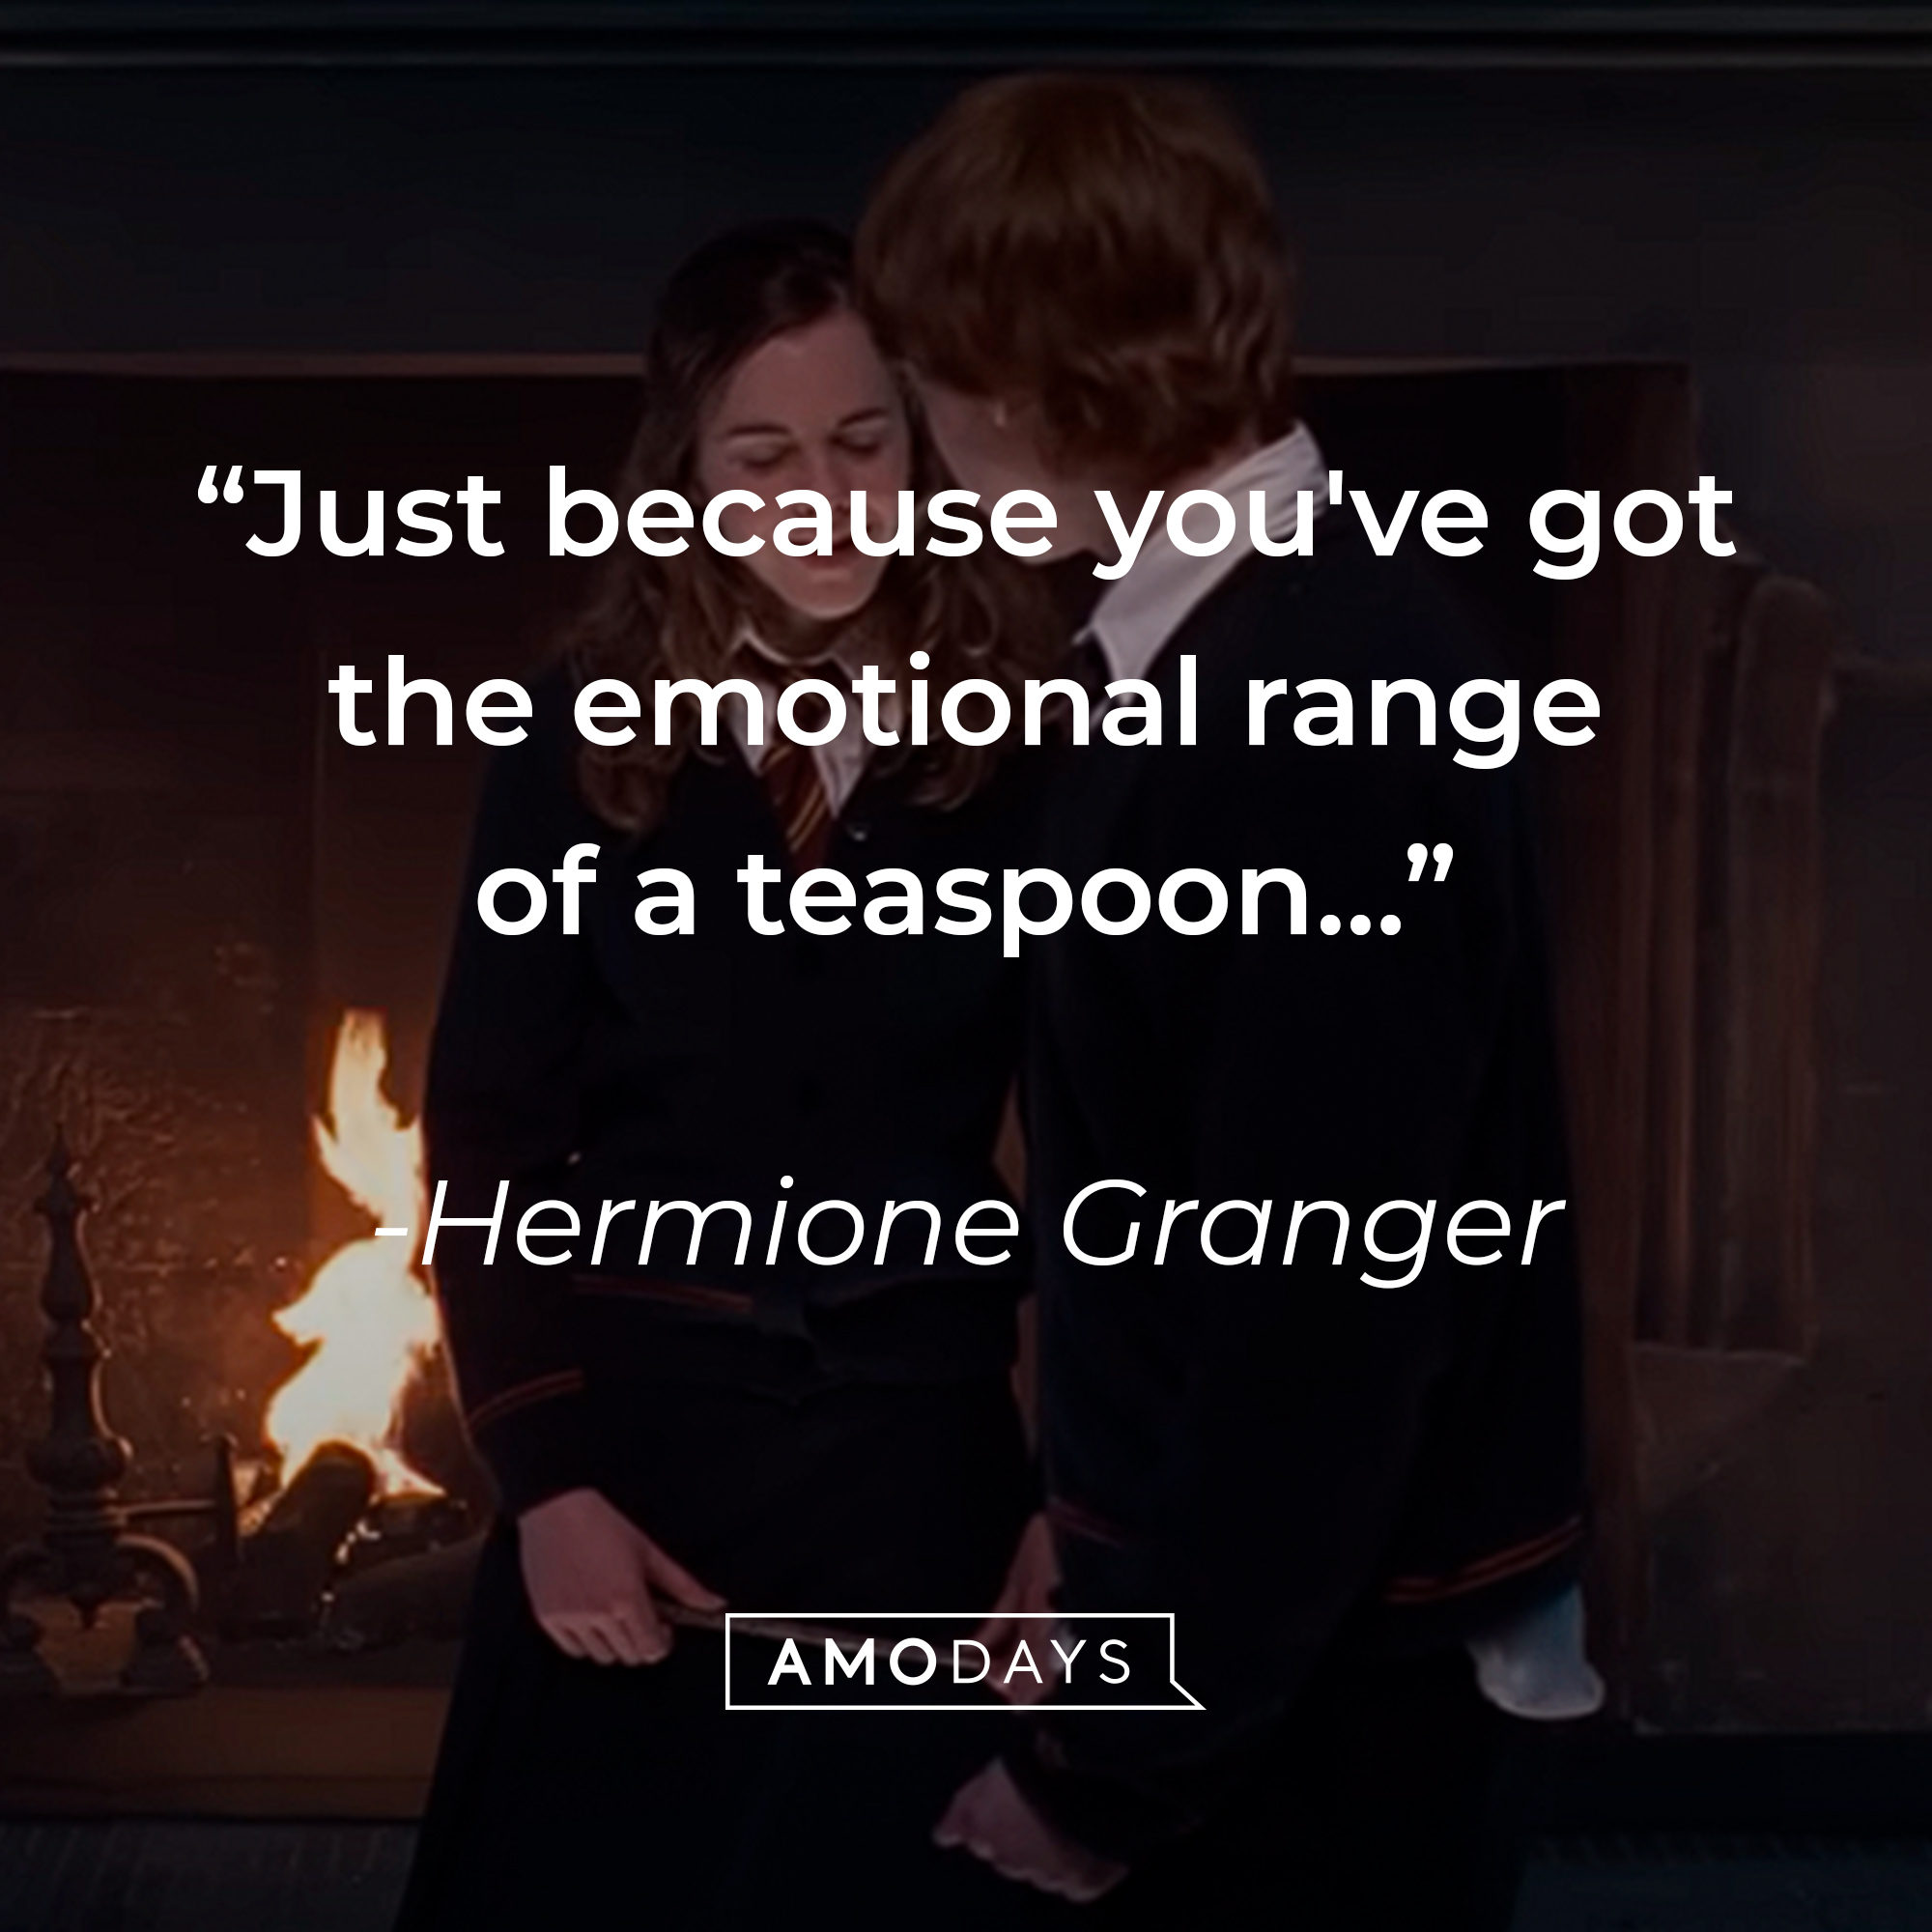 Hermione Granger's quote: “Just because you've got the emotional range of a teaspoon…” | Source: youtube.com/harrypotter